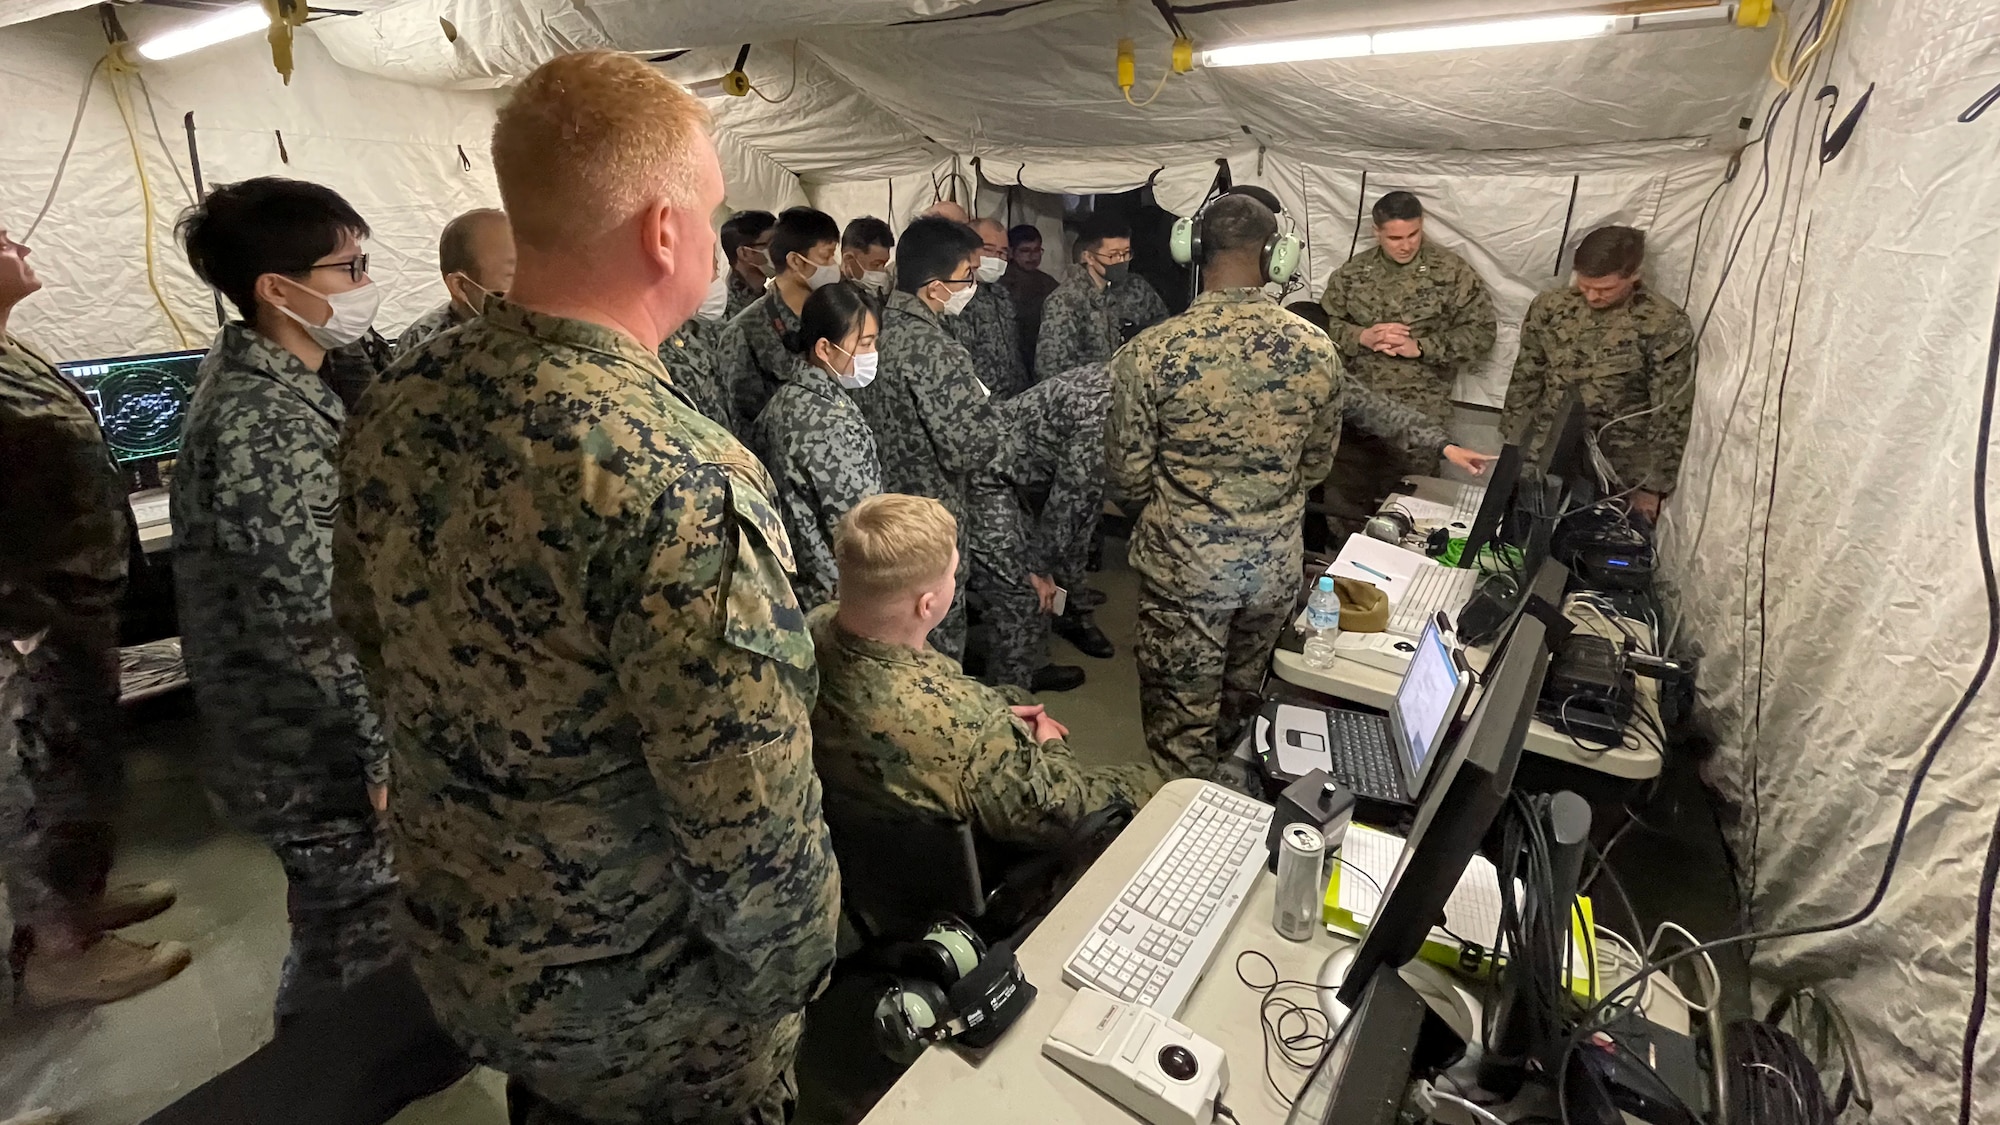 20 U.S. Marines and Japanese air force members crowd around a monitor in a large tent